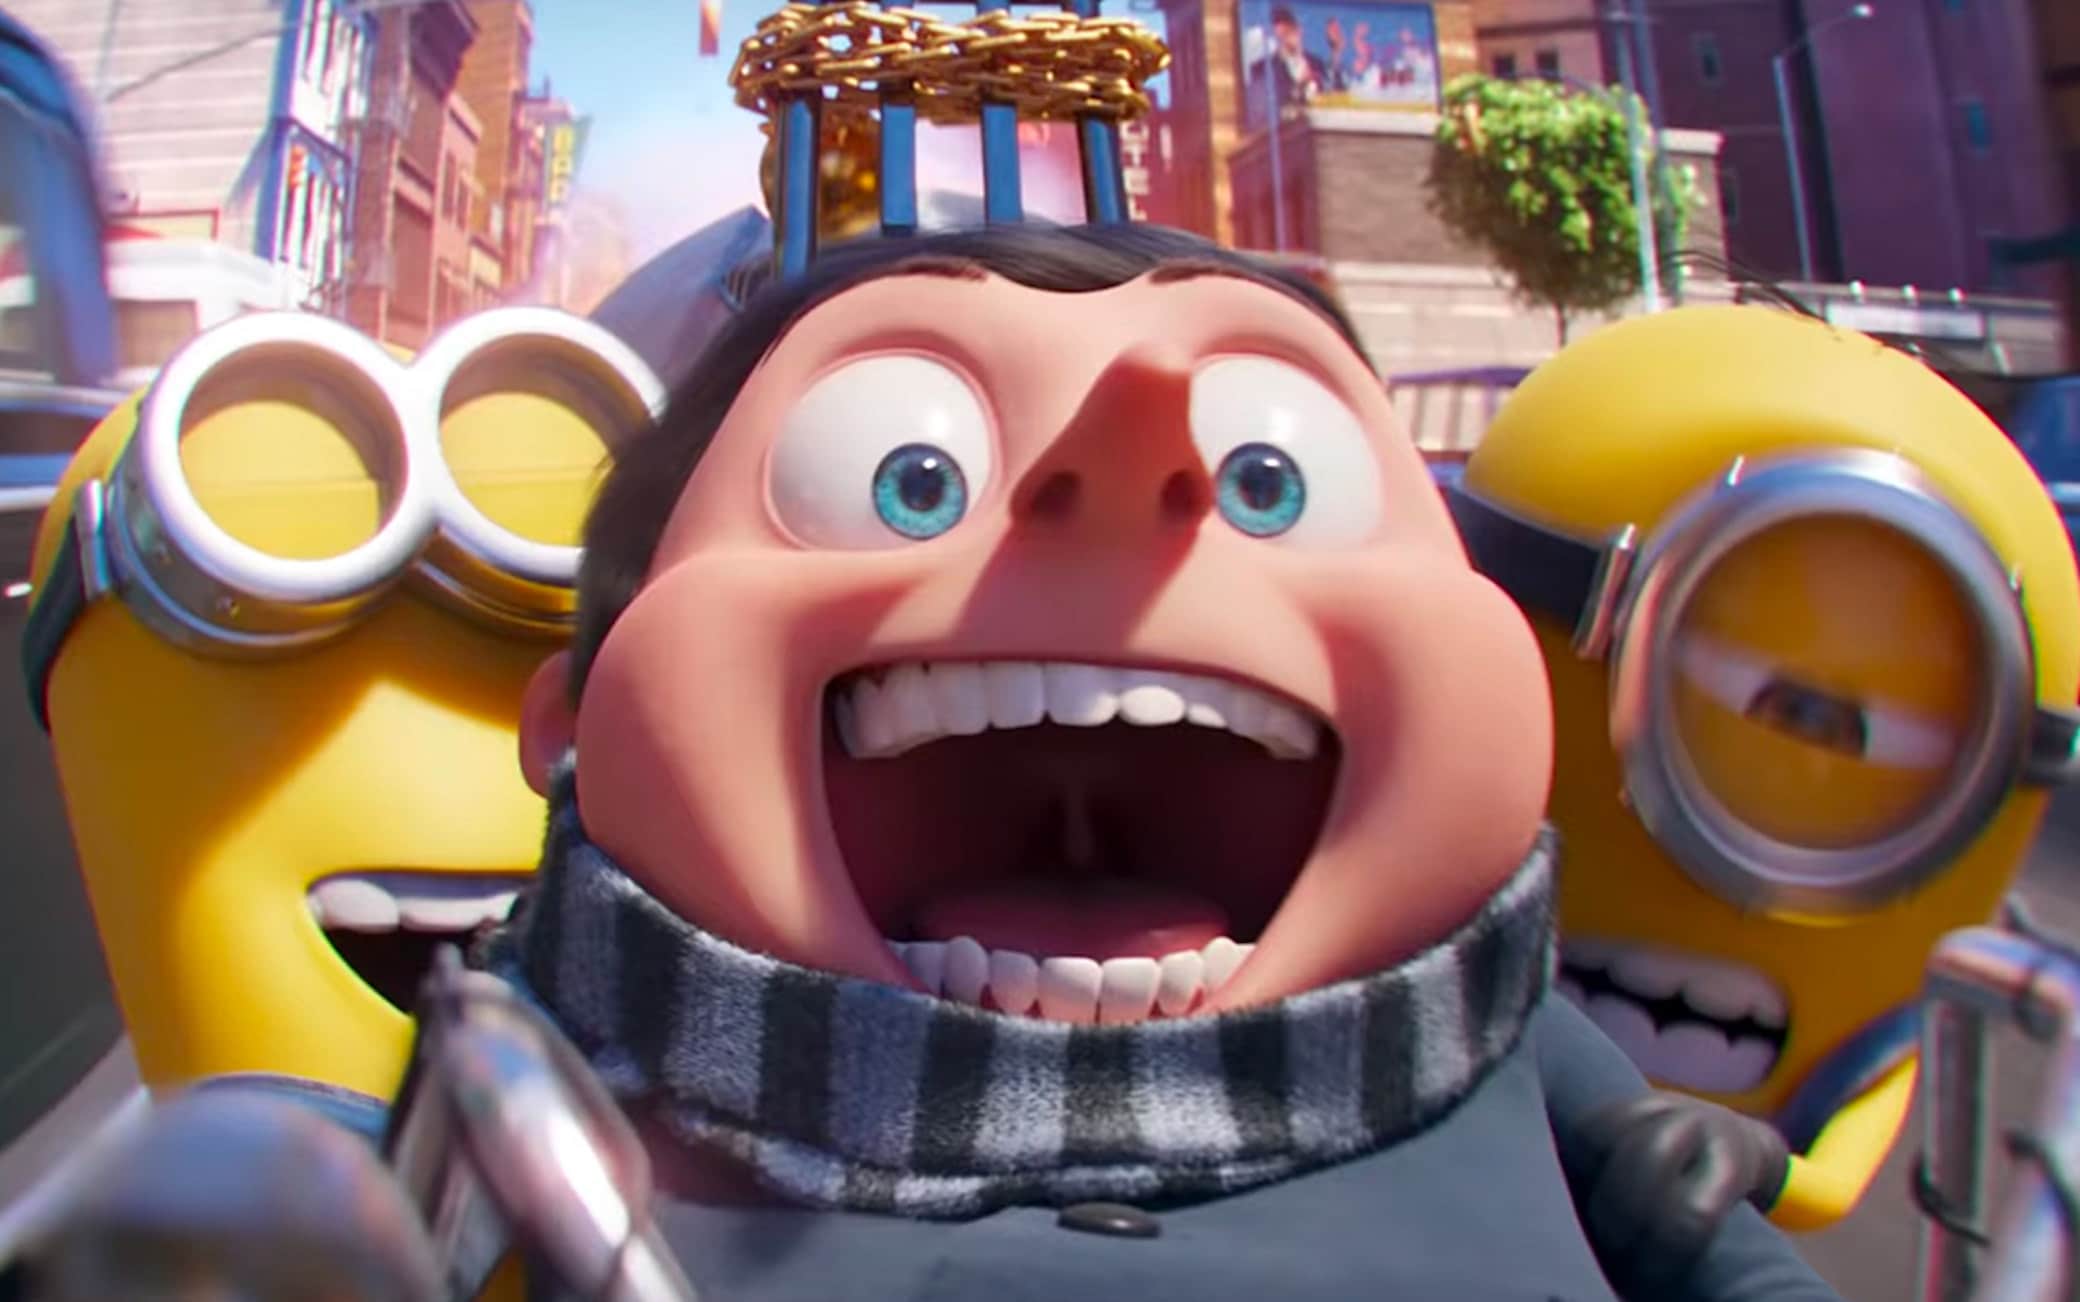 Minions 2 – How Gru Becomes Despicable, new trailer for the new act of the saga